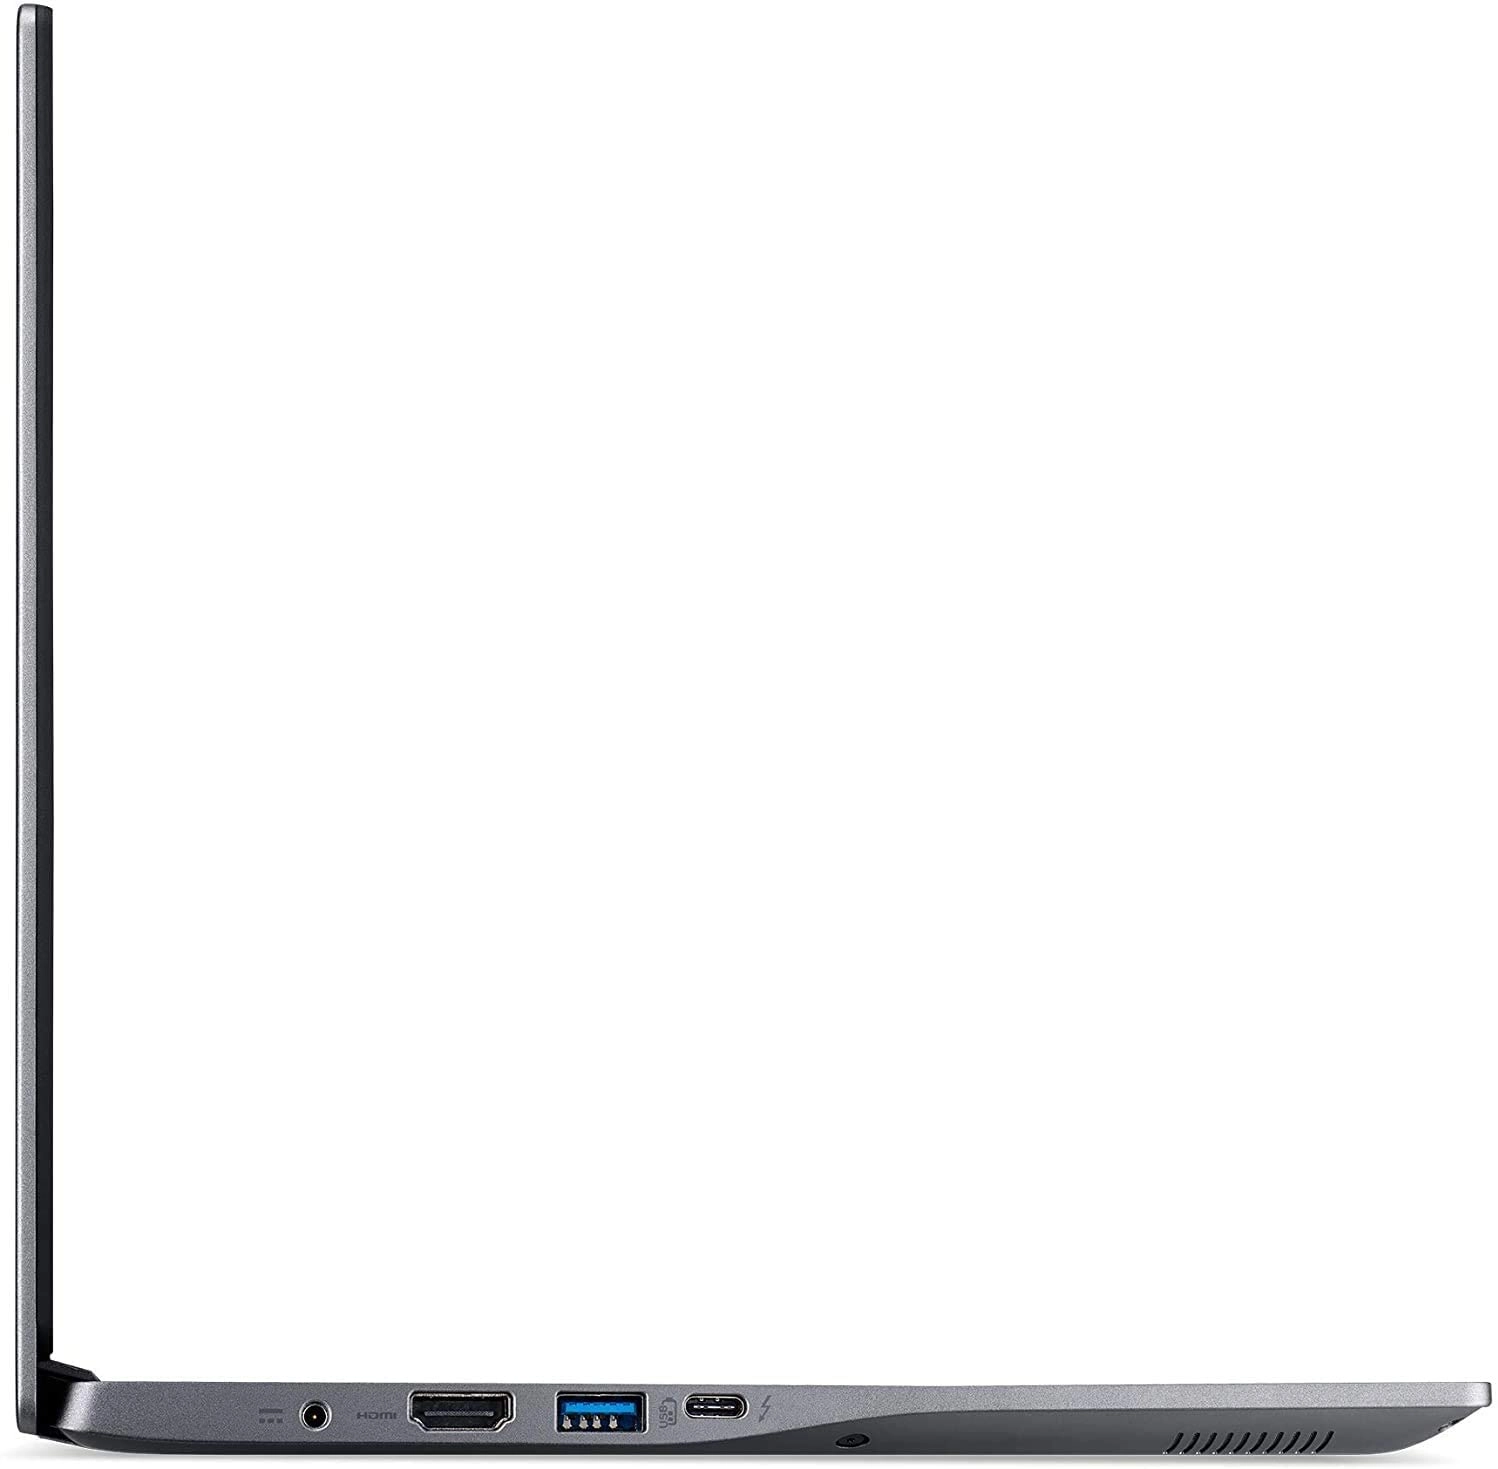 Acer SF314-57 laptop image